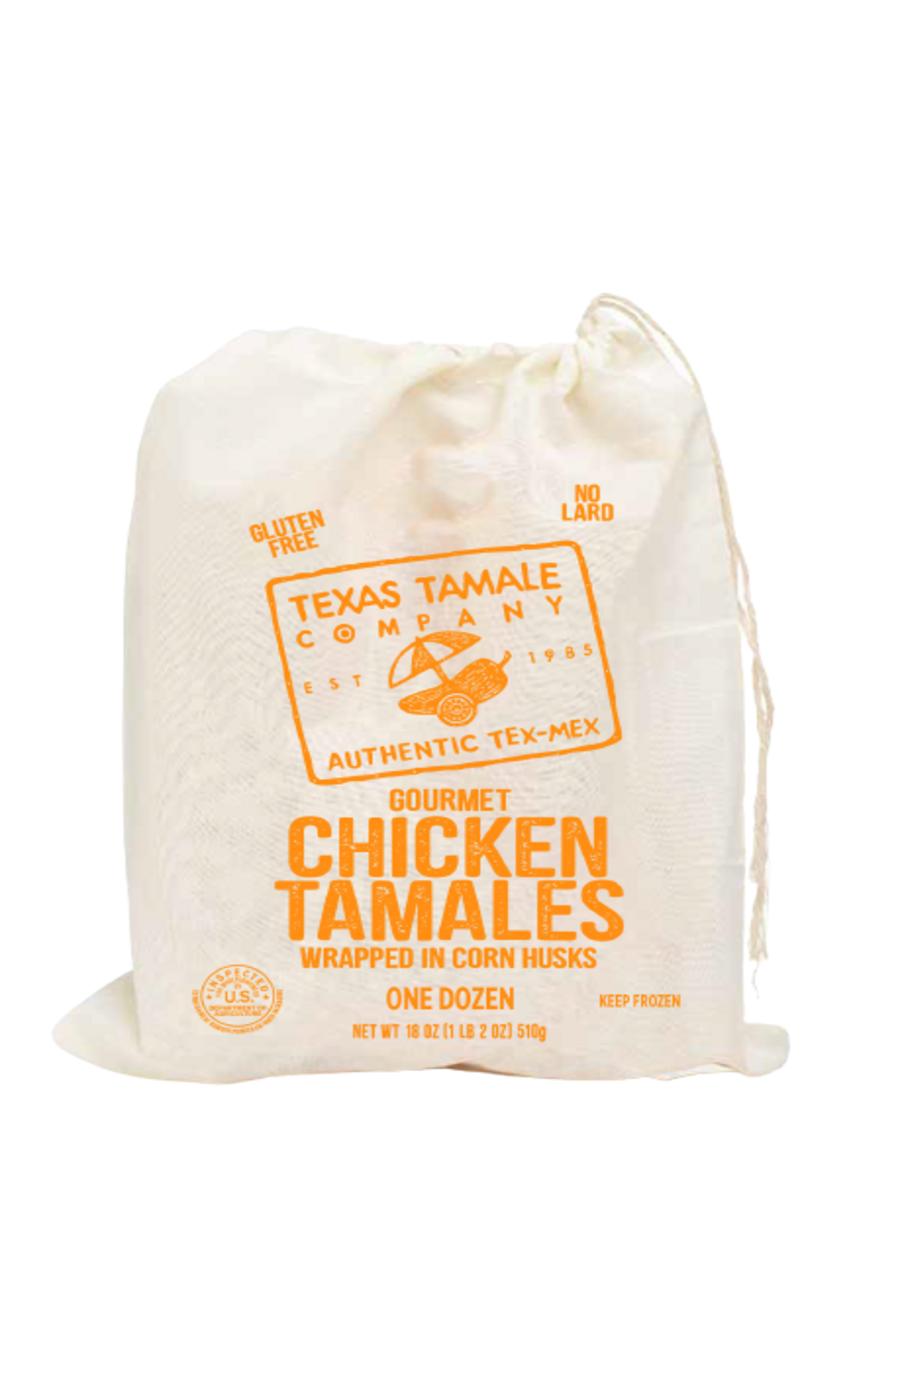 Texas Tamale Company Gourmet Chicken Tamales; image 1 of 2